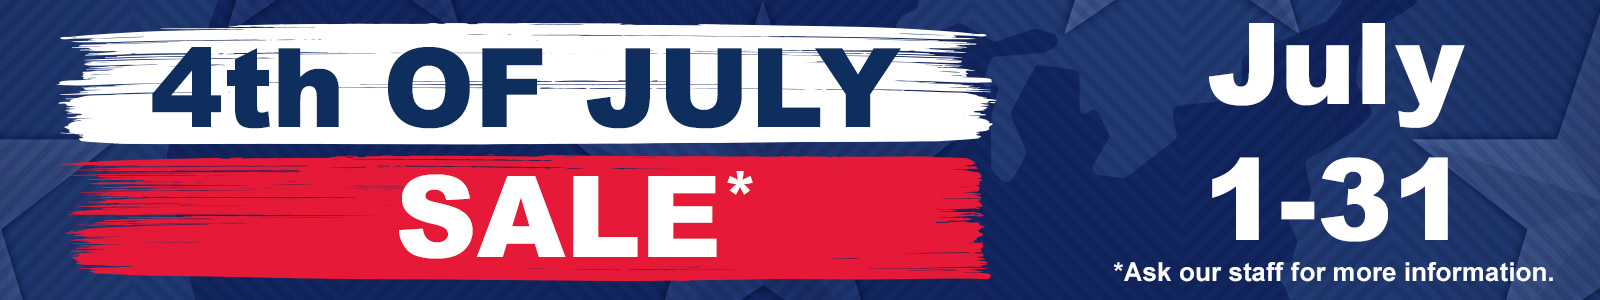 4th-of-july-sale-banner